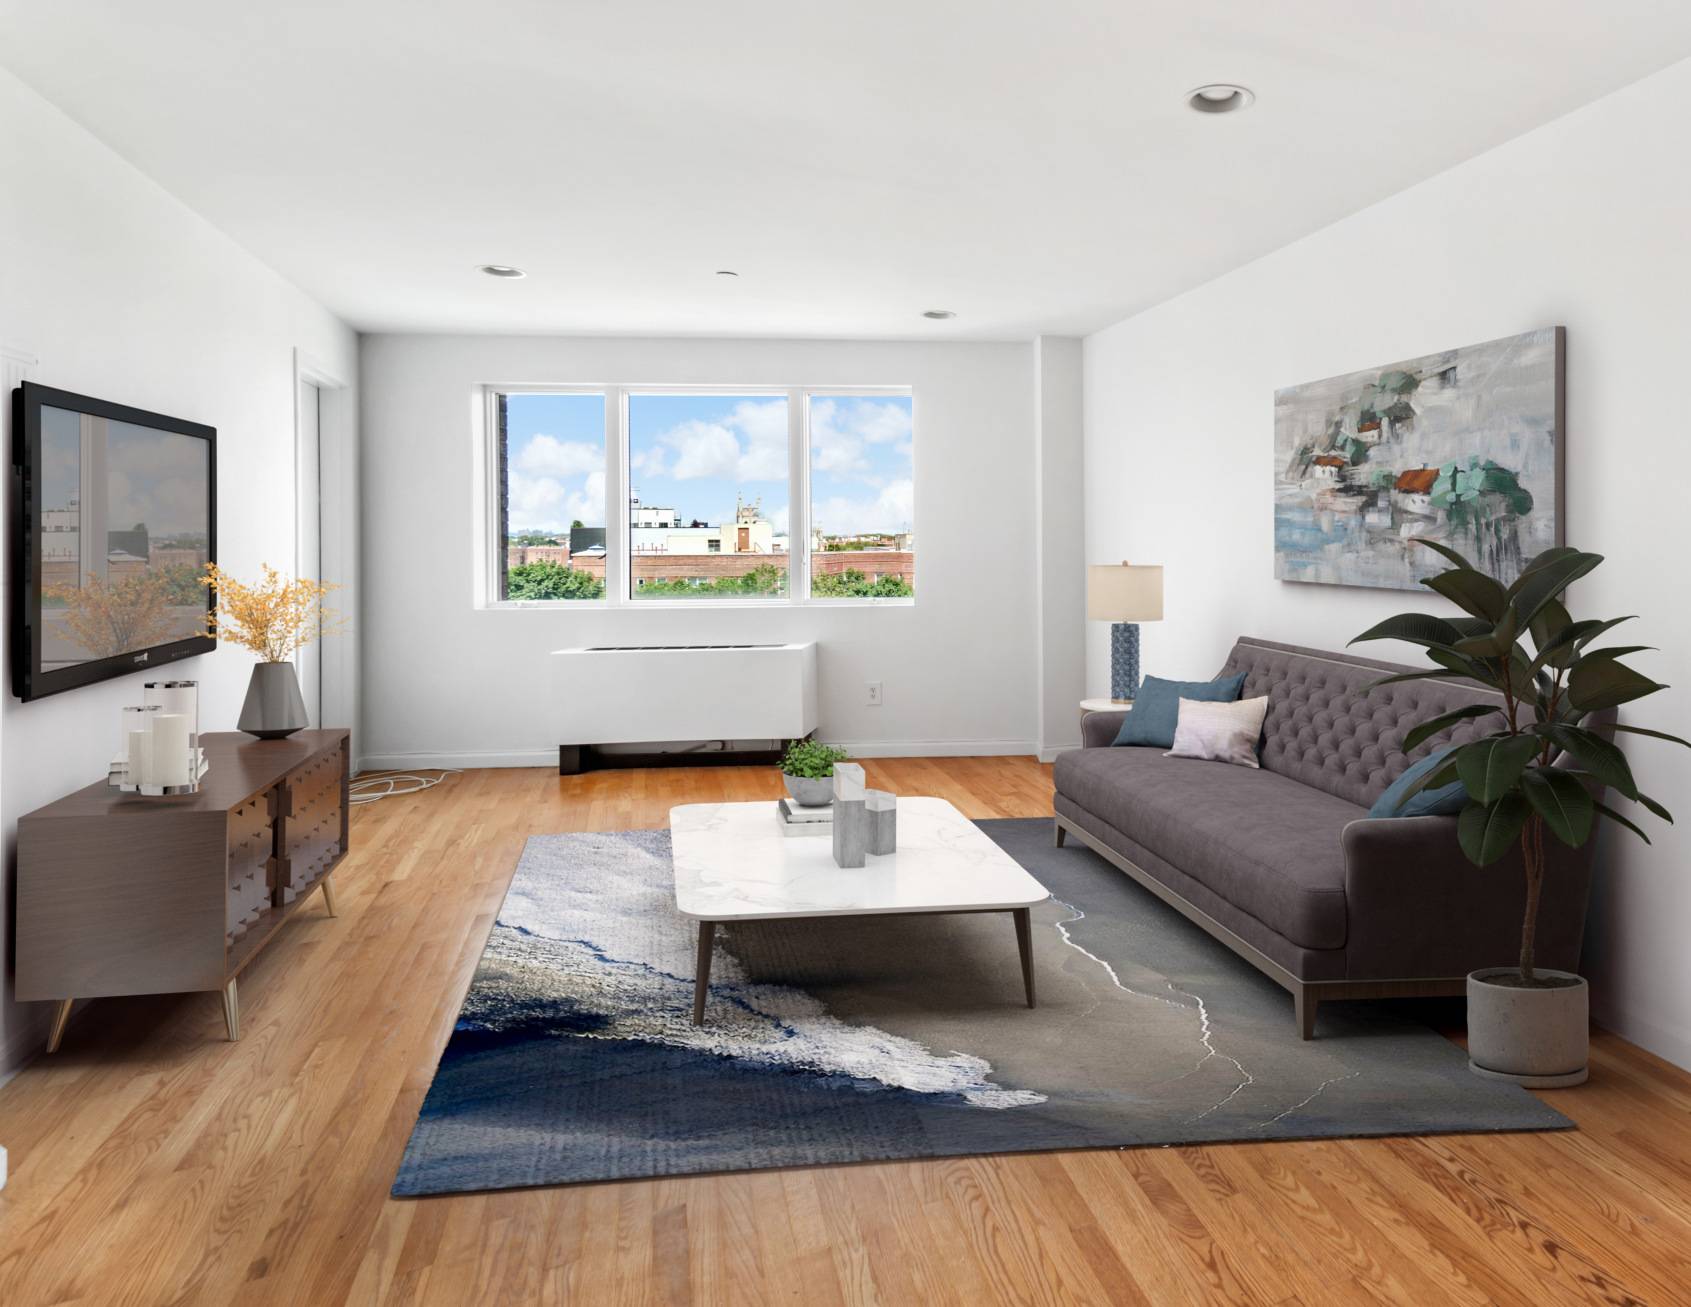 FIRST YEAR OF COMMON CHARGES COVERED BY THE OWNERA one of a kind two bedroom and two bathroom penthouse apartment with a private balcony offering fantastic views of Brooklyn and ...